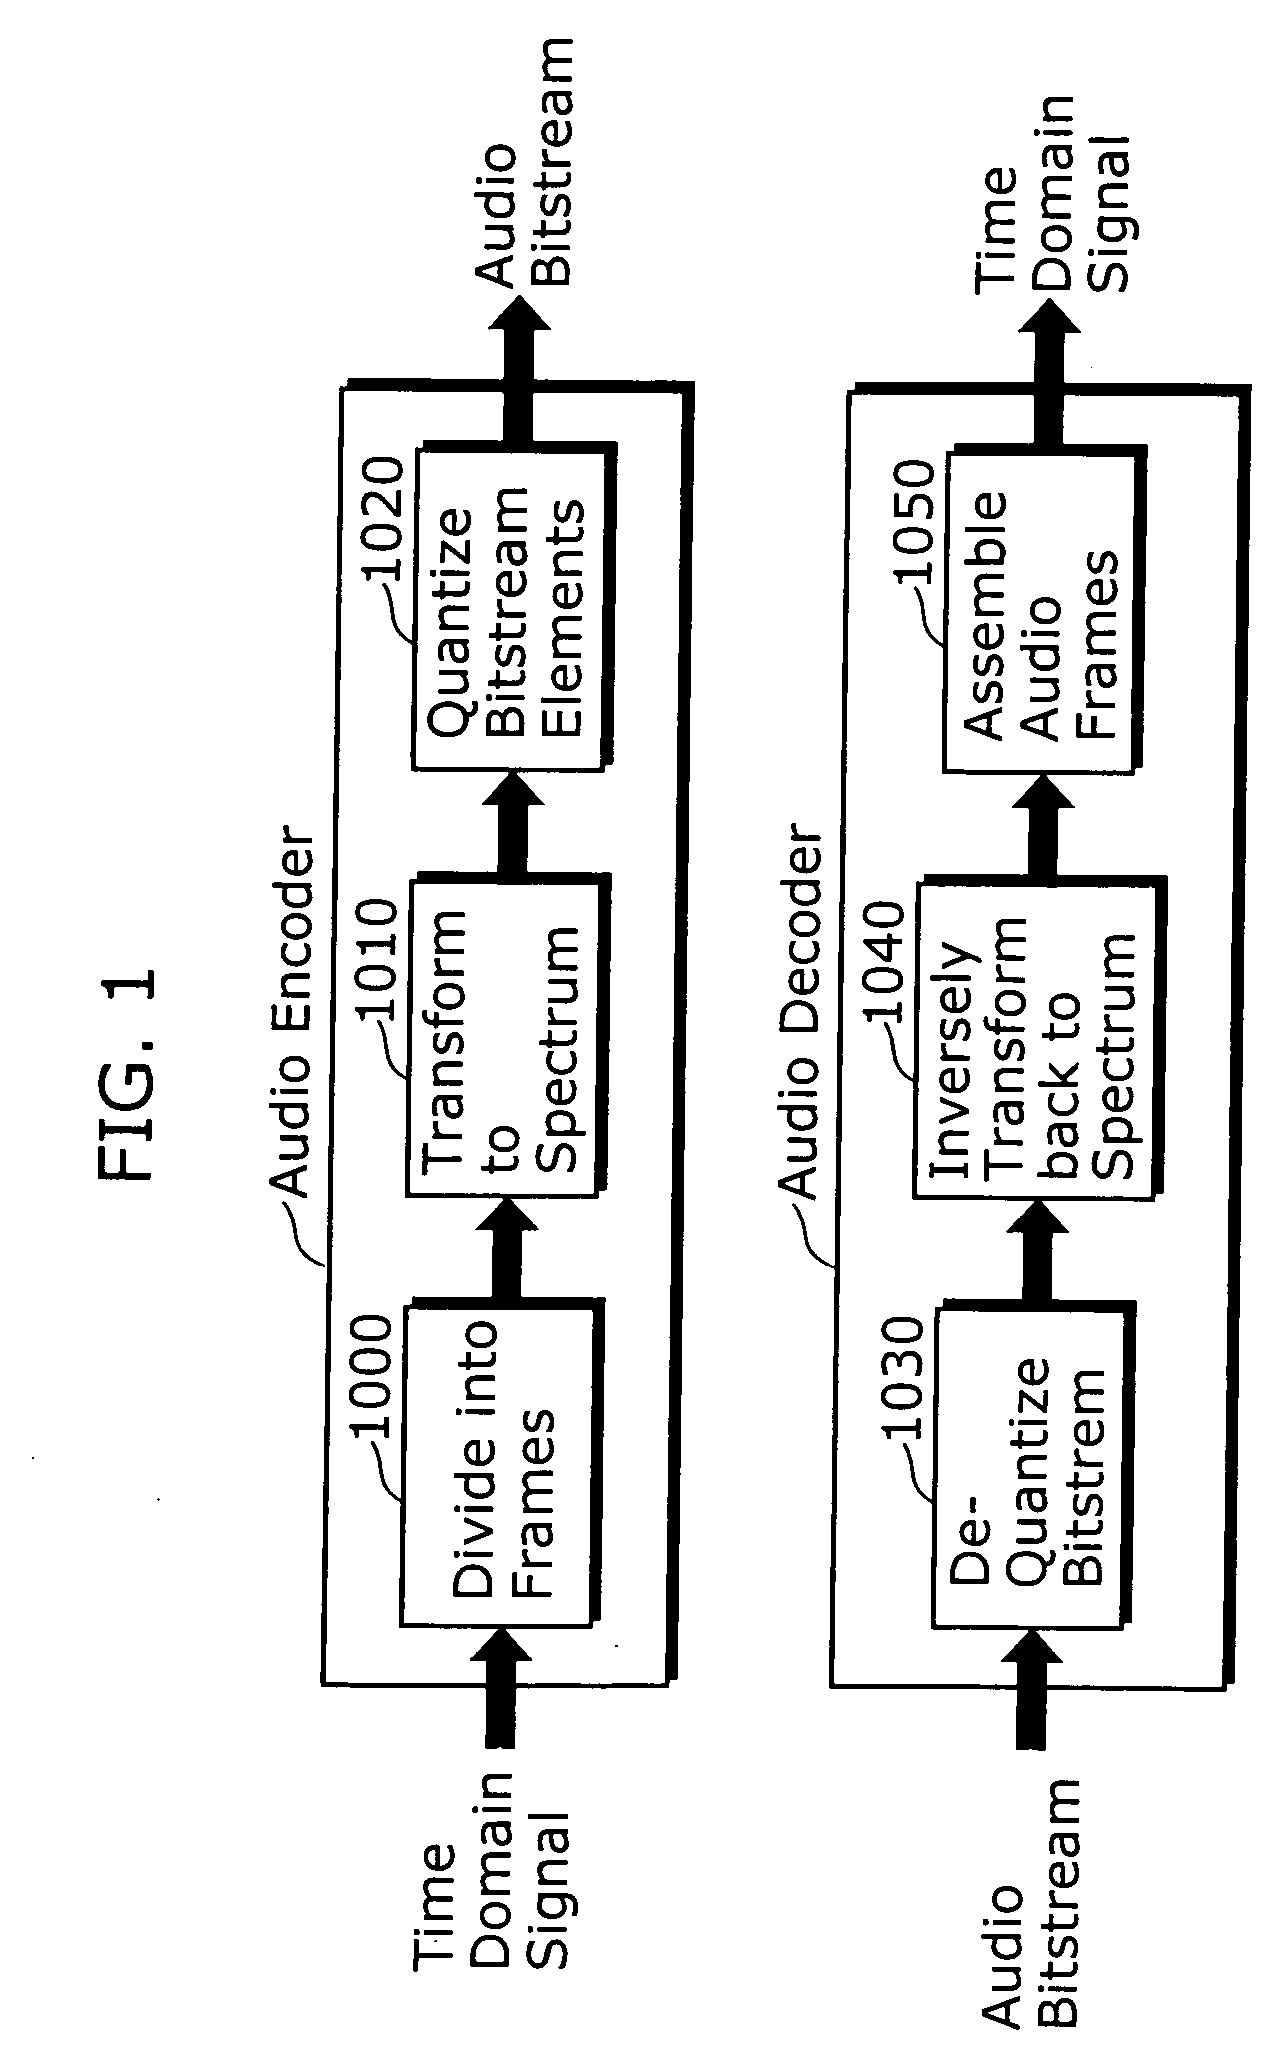 Method for deciding time boundary for encoding spectrum envelope and frequency resolution